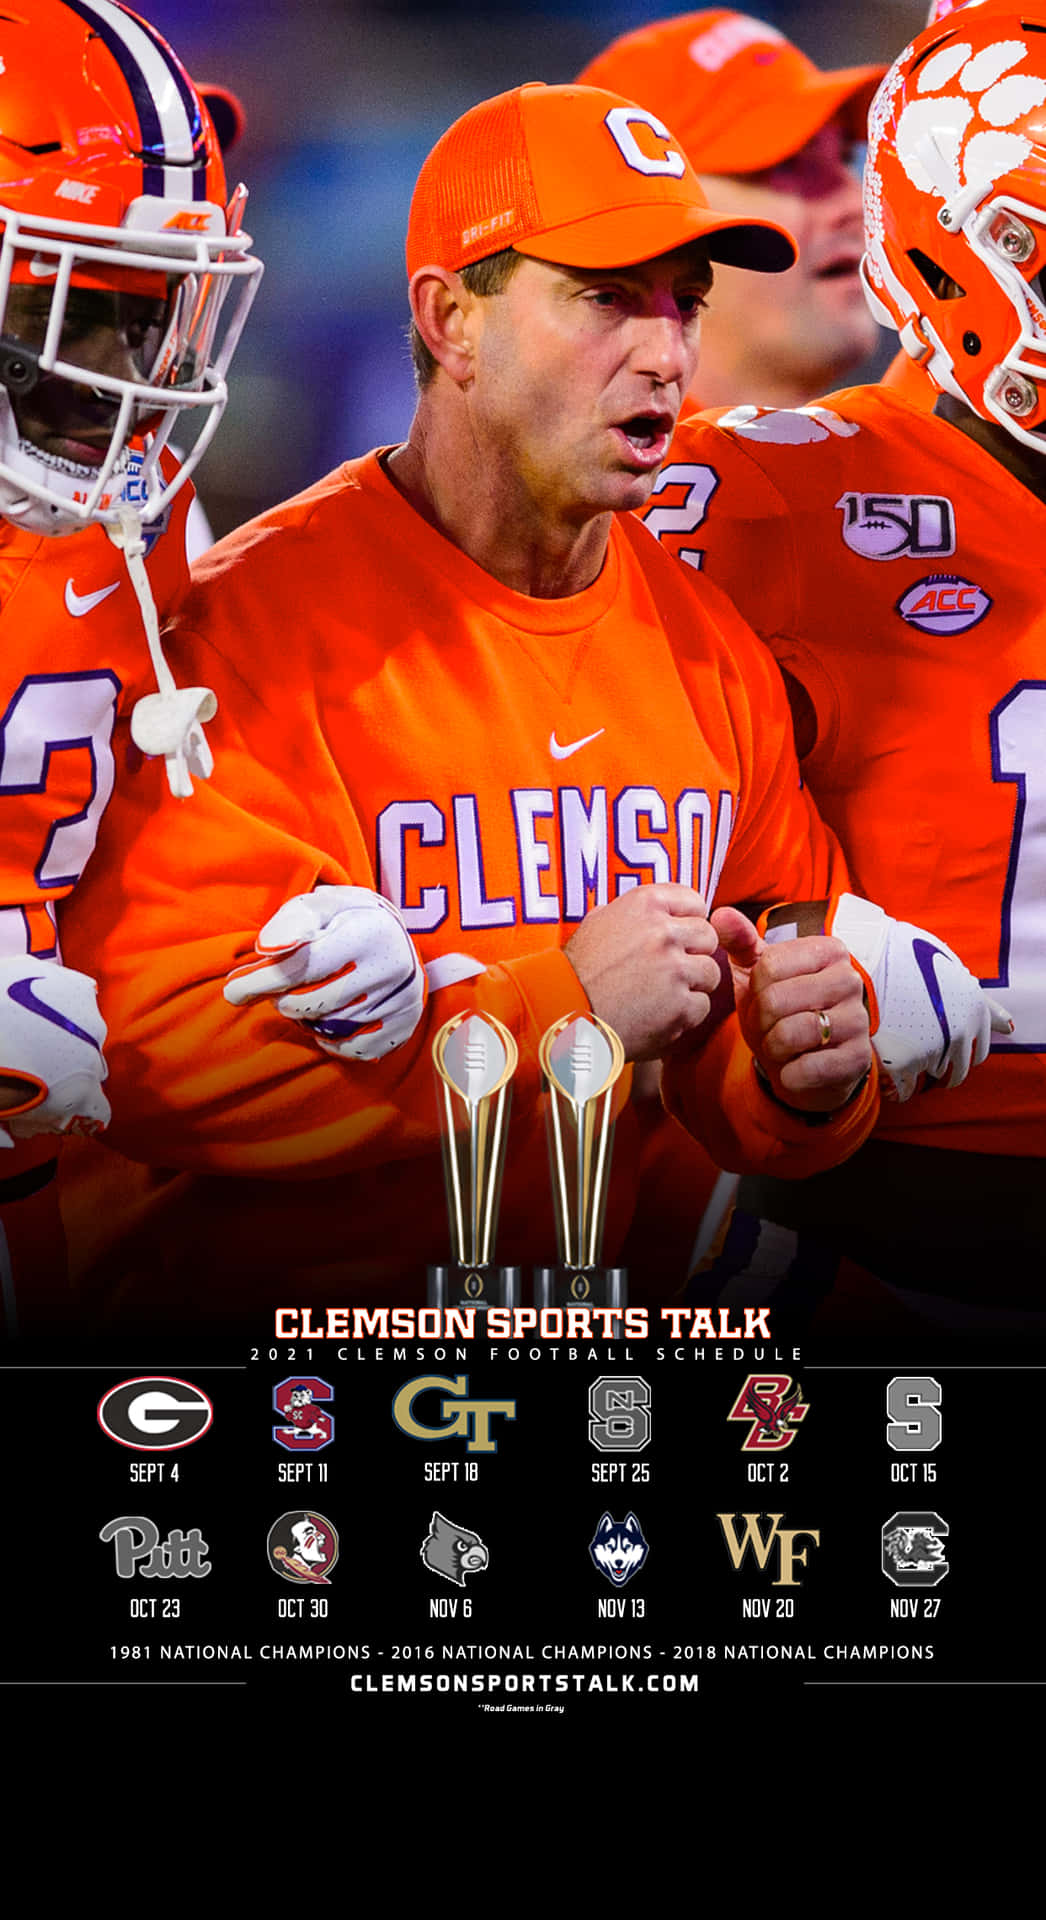 Show Your Clemson Pride with This iPhone Wallpaper